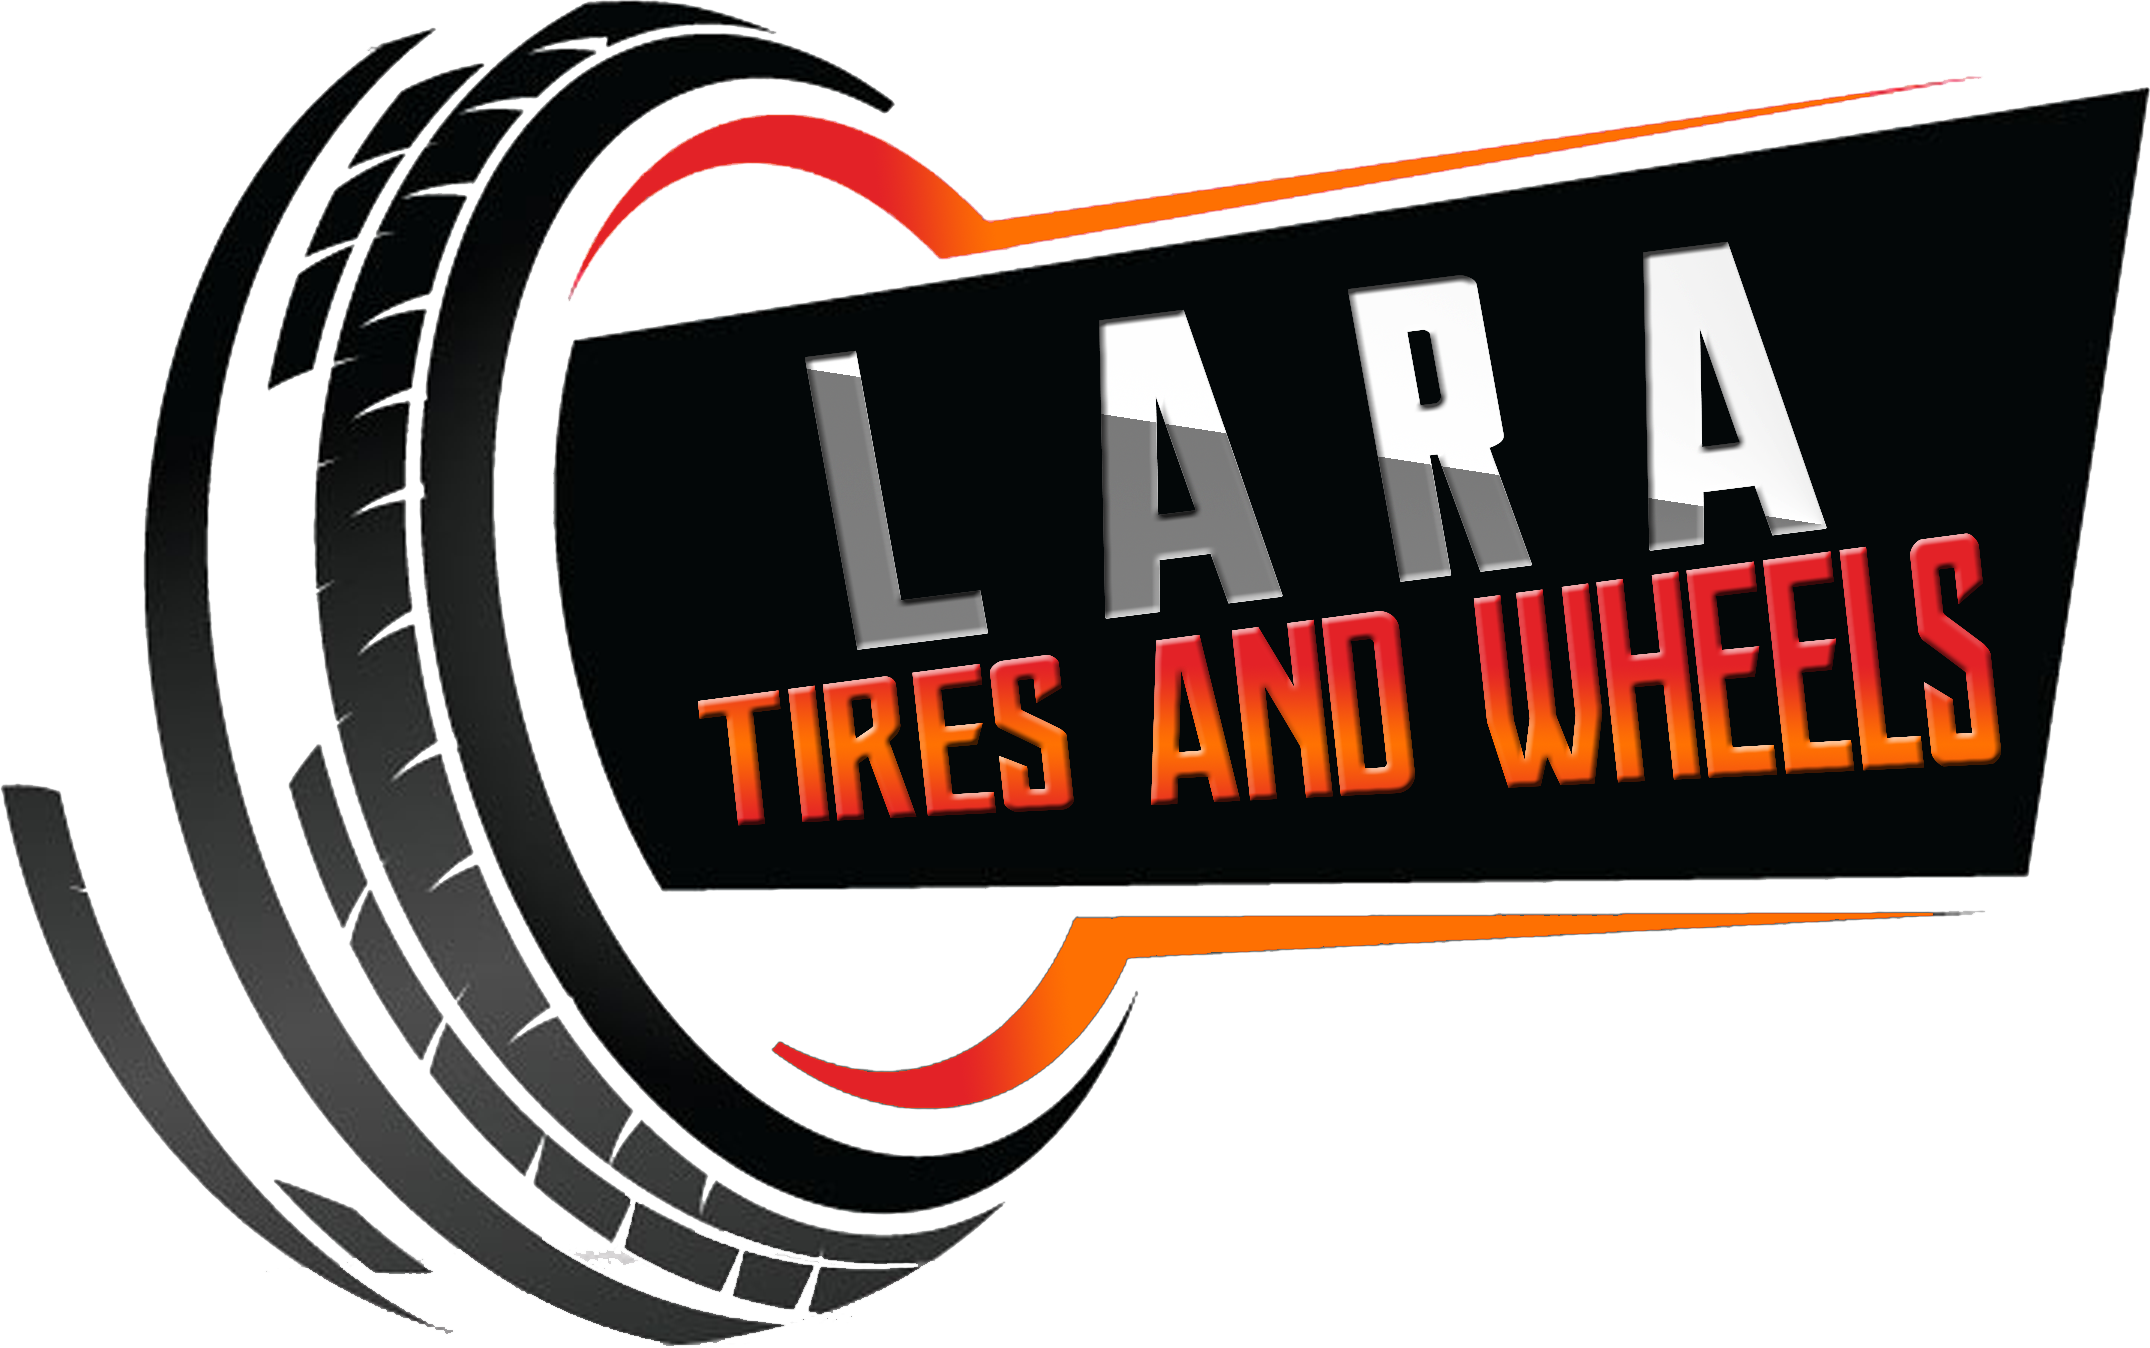 Welcome to Lara Tires & Wheels